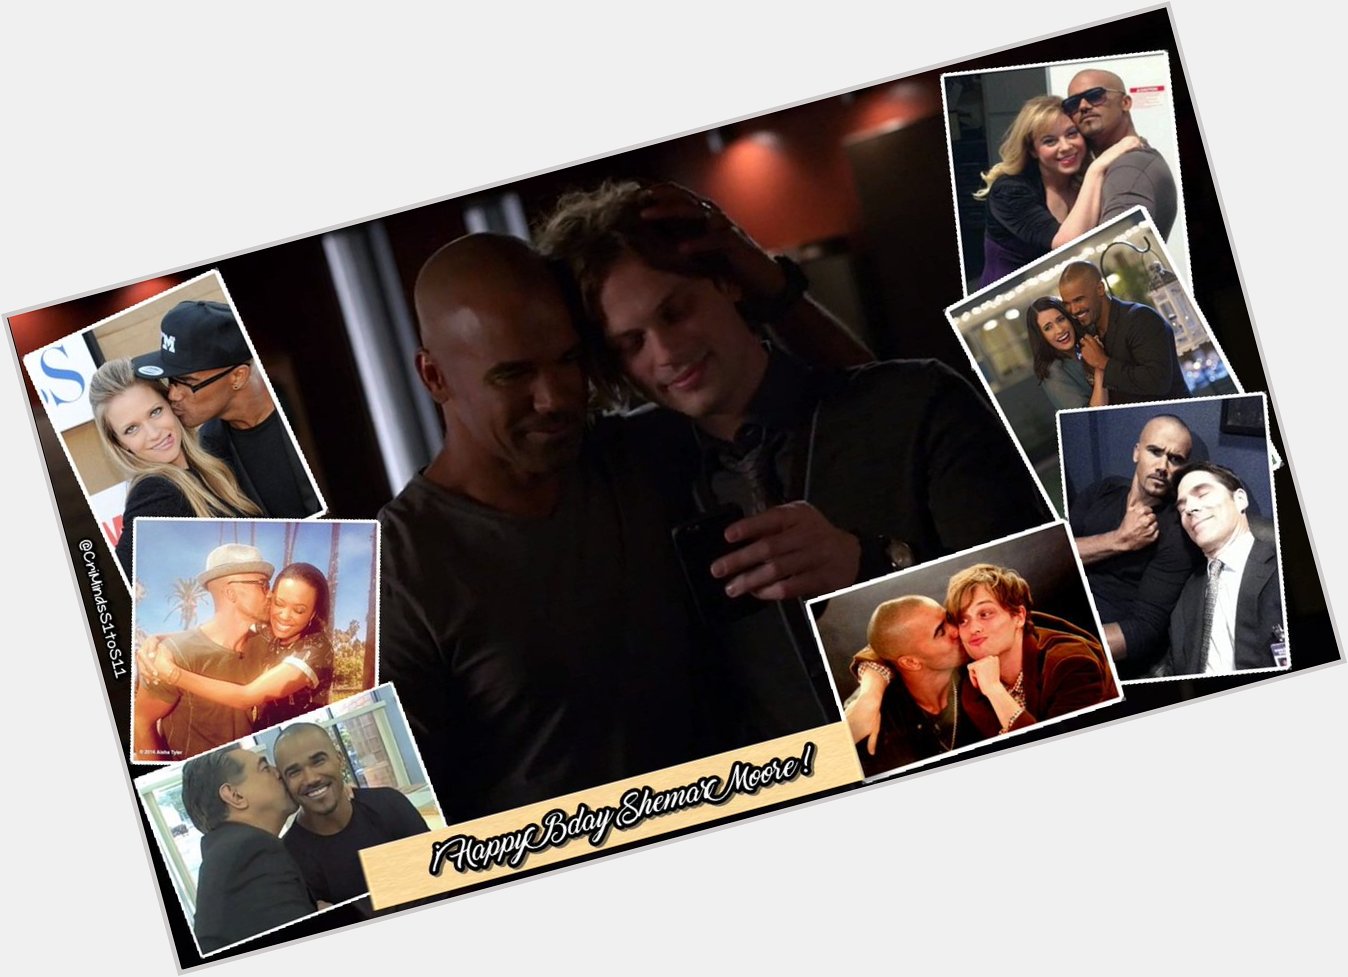  Happy Bday Shemar Moore Have a wonderful day    